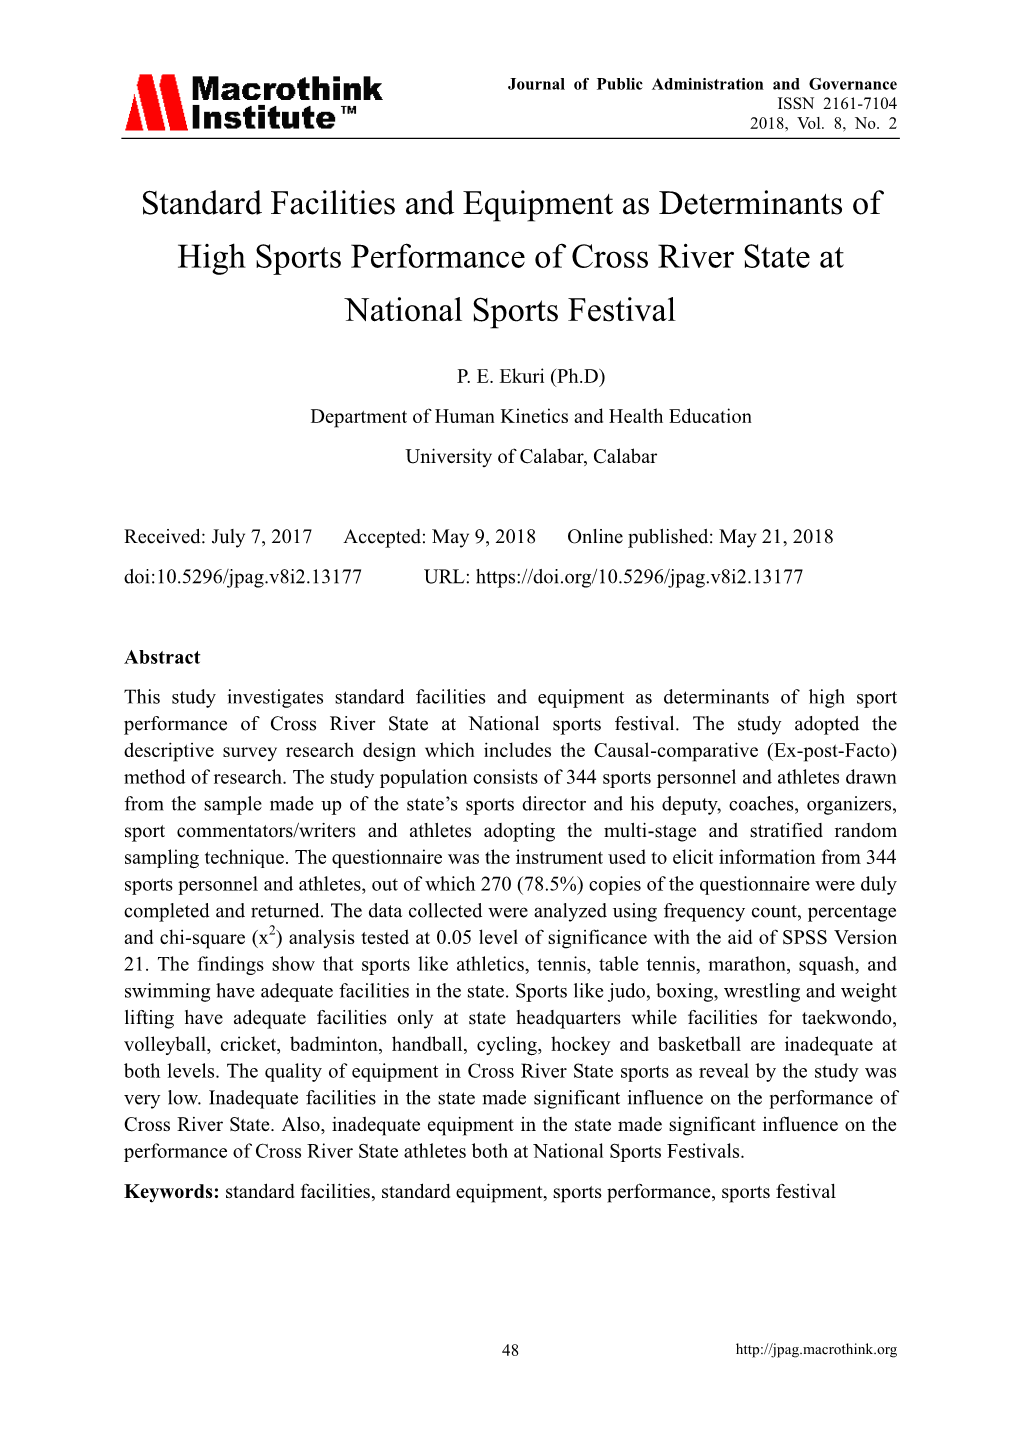 Standard Facilities and Equipment As Determinants of High Sports Performance of Cross River State at National Sports Festival